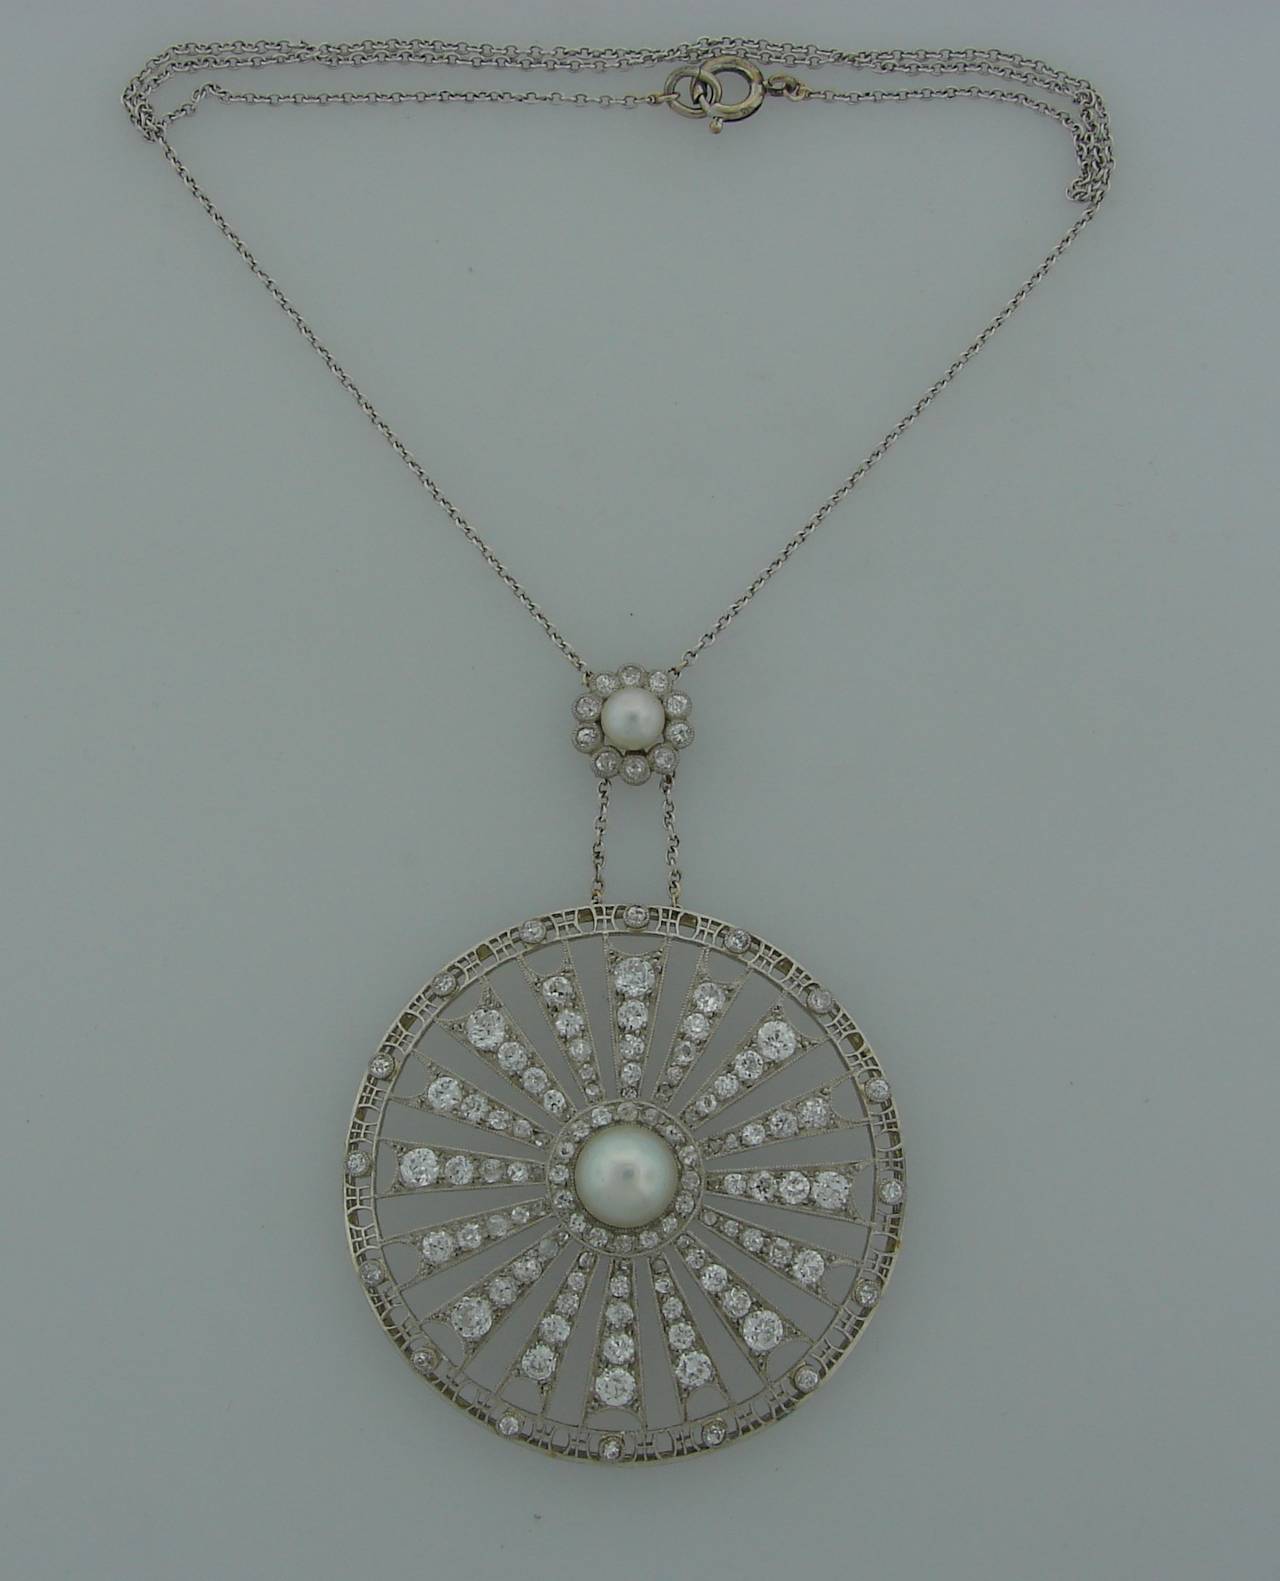 Gorgeous Edwardian circle pendant. Made of platinum, features two natural pearls and Old European cut diamonds. 

Diameter 2